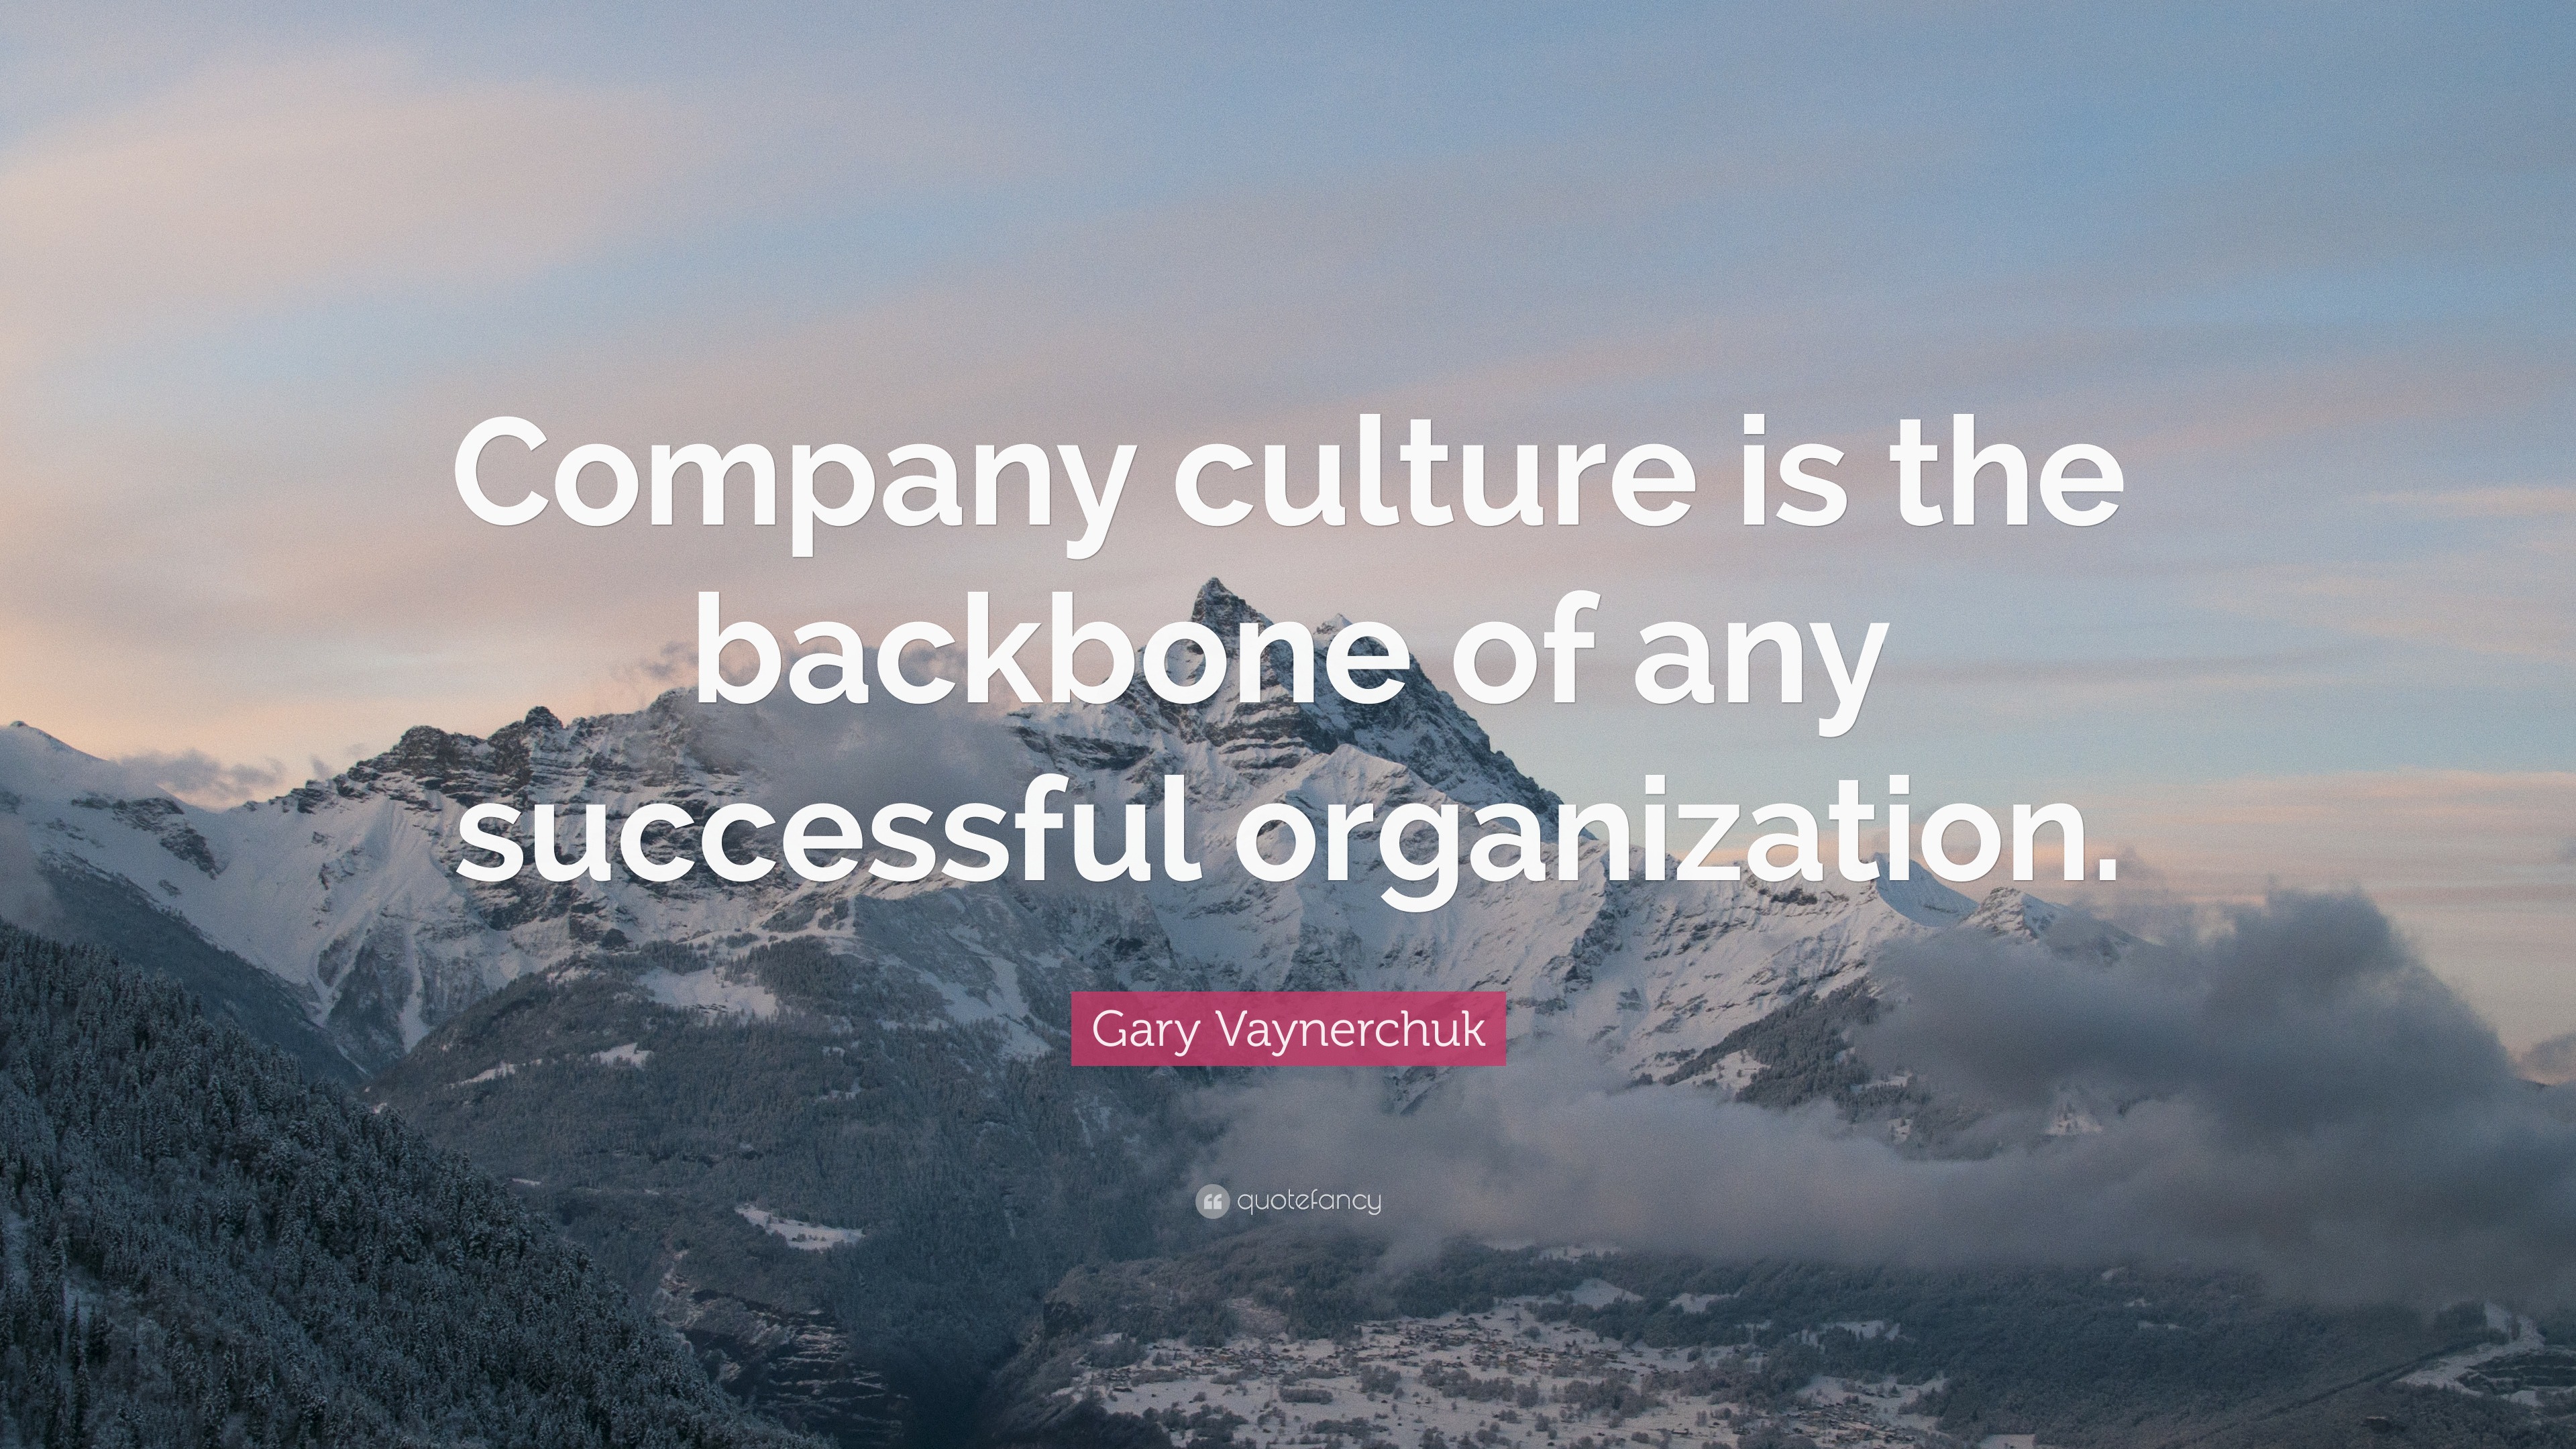 Culture corporate quotes organizational develop itself will quotesgram does